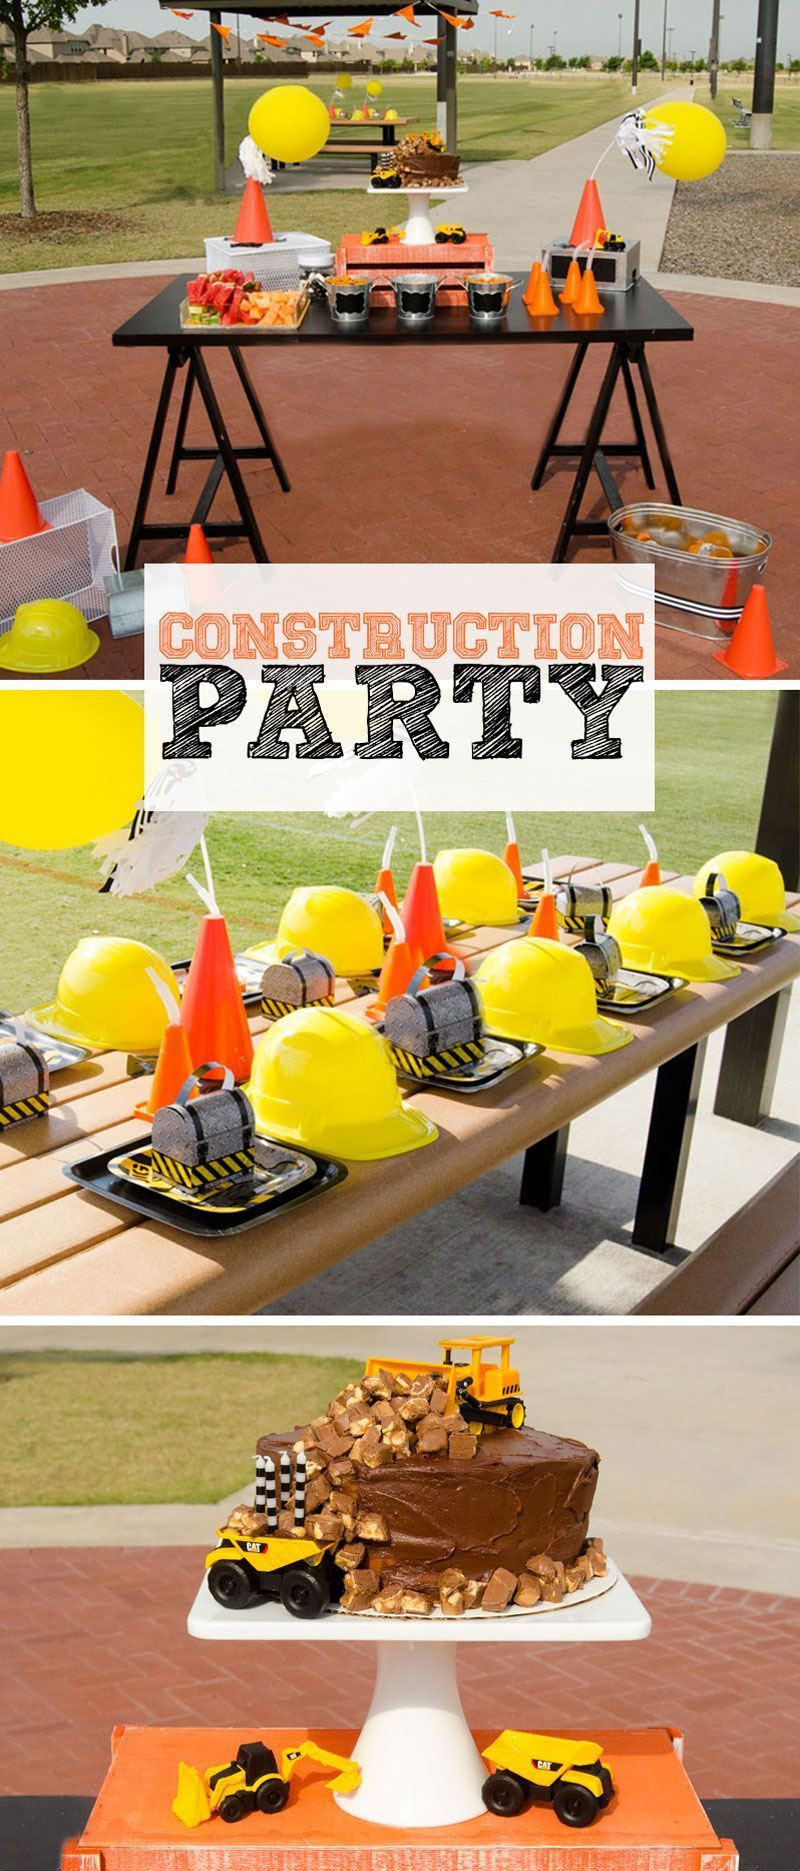 Construction Birthday Party Decorations
 DIY Construction Party Ideas